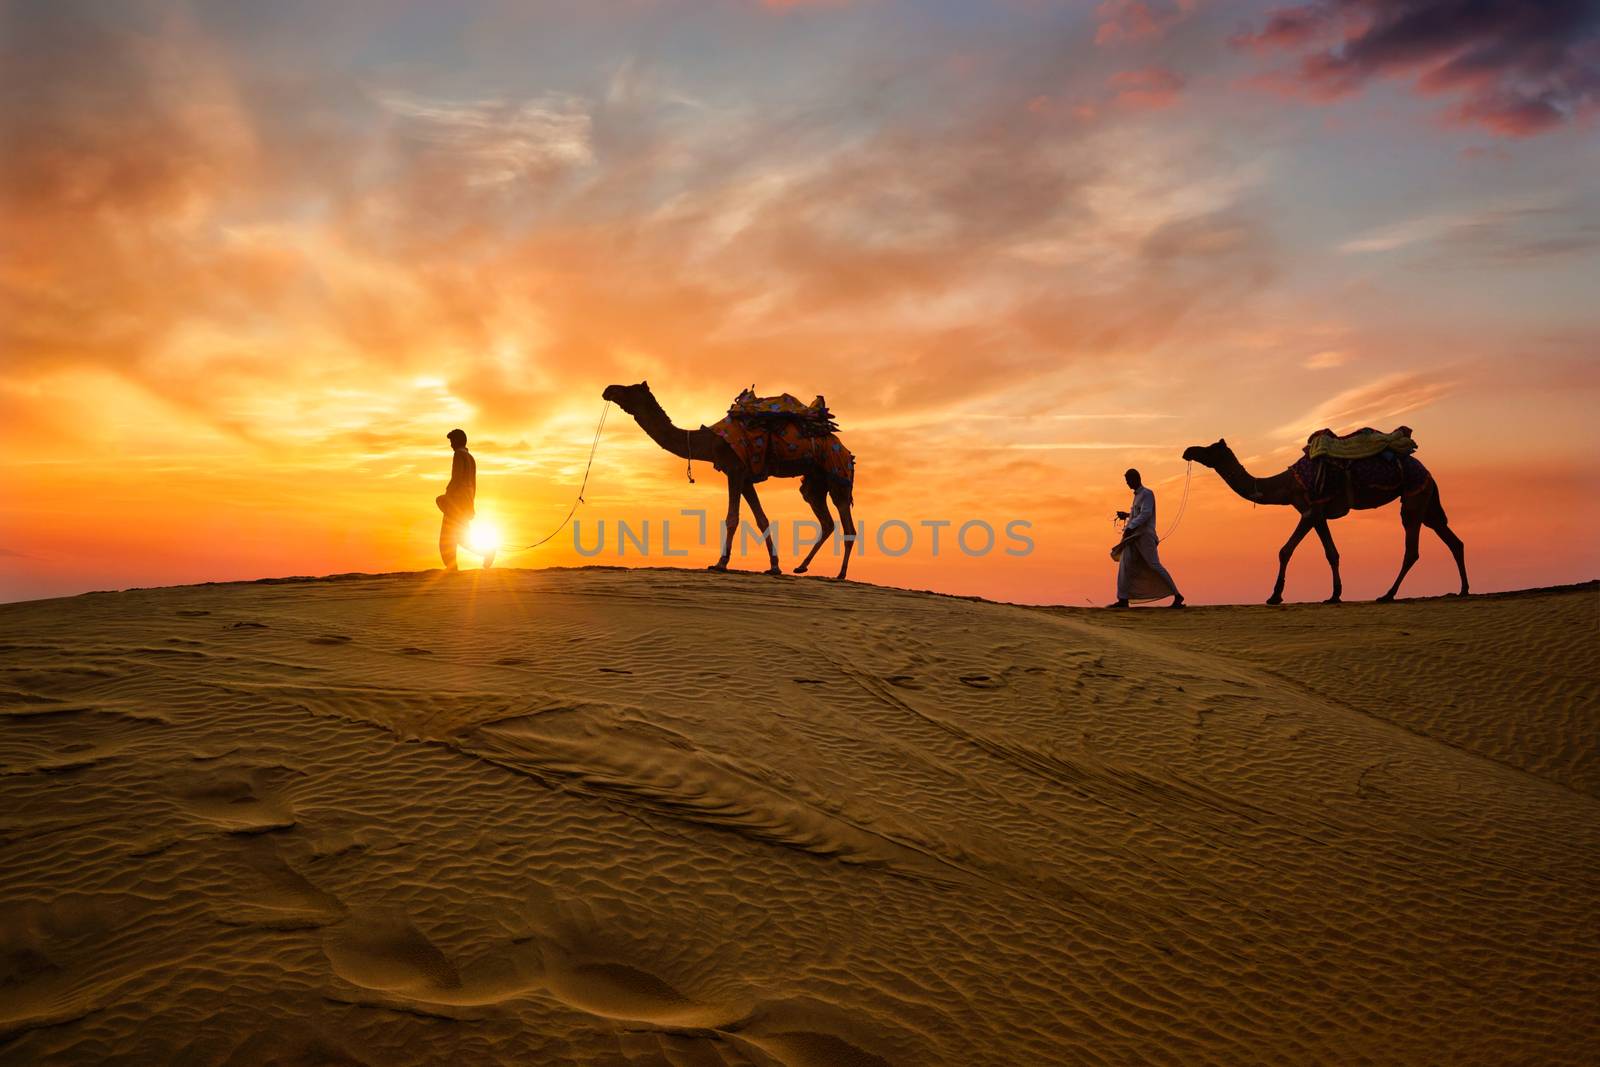 Indian cameleers camel driver with camel silhouettes in dunes on sunset. Jaisalmer, Rajasthan, India by dimol